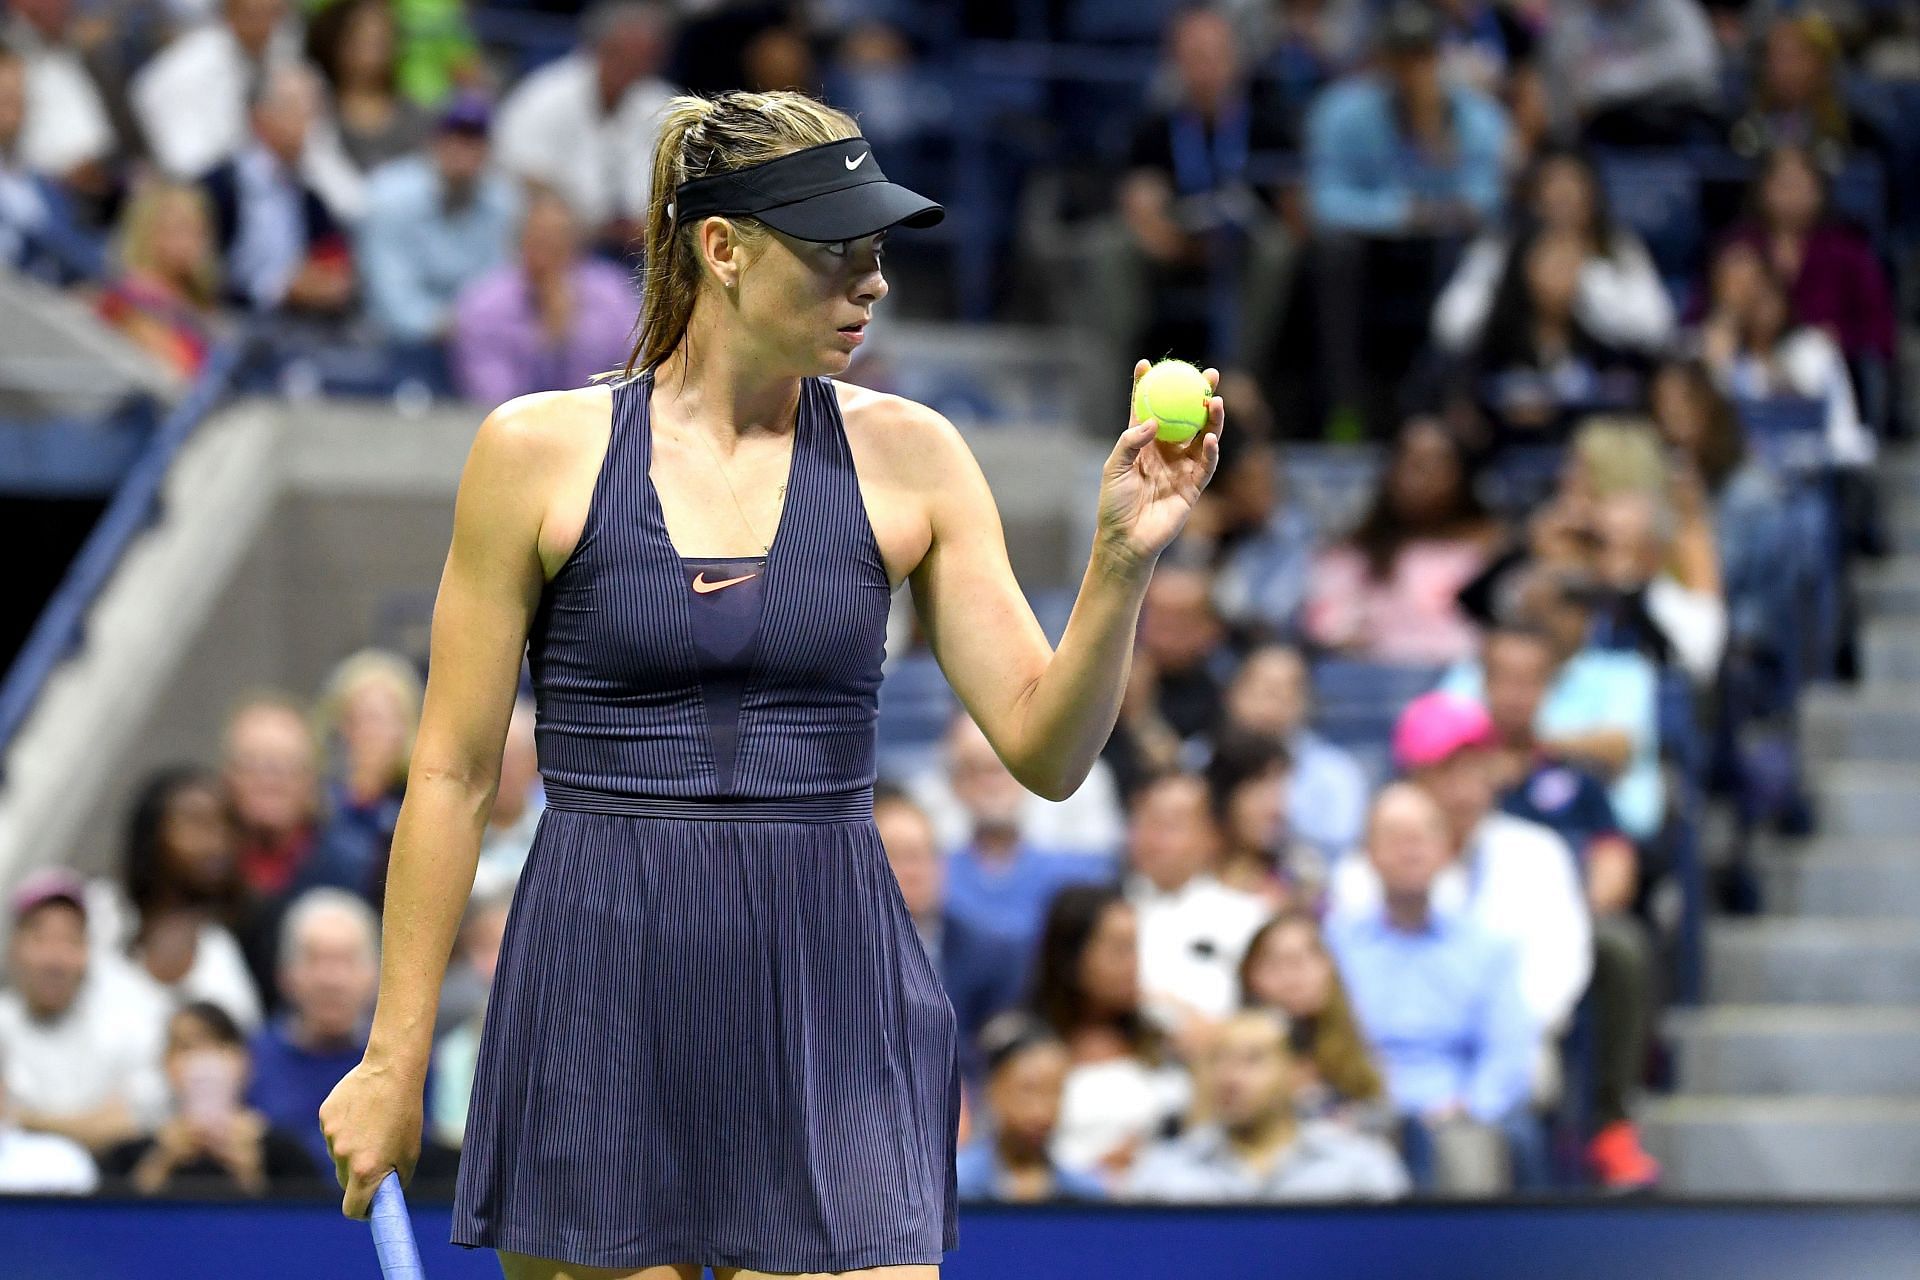 Maria Sharapova pictured at the 2019 US Open.